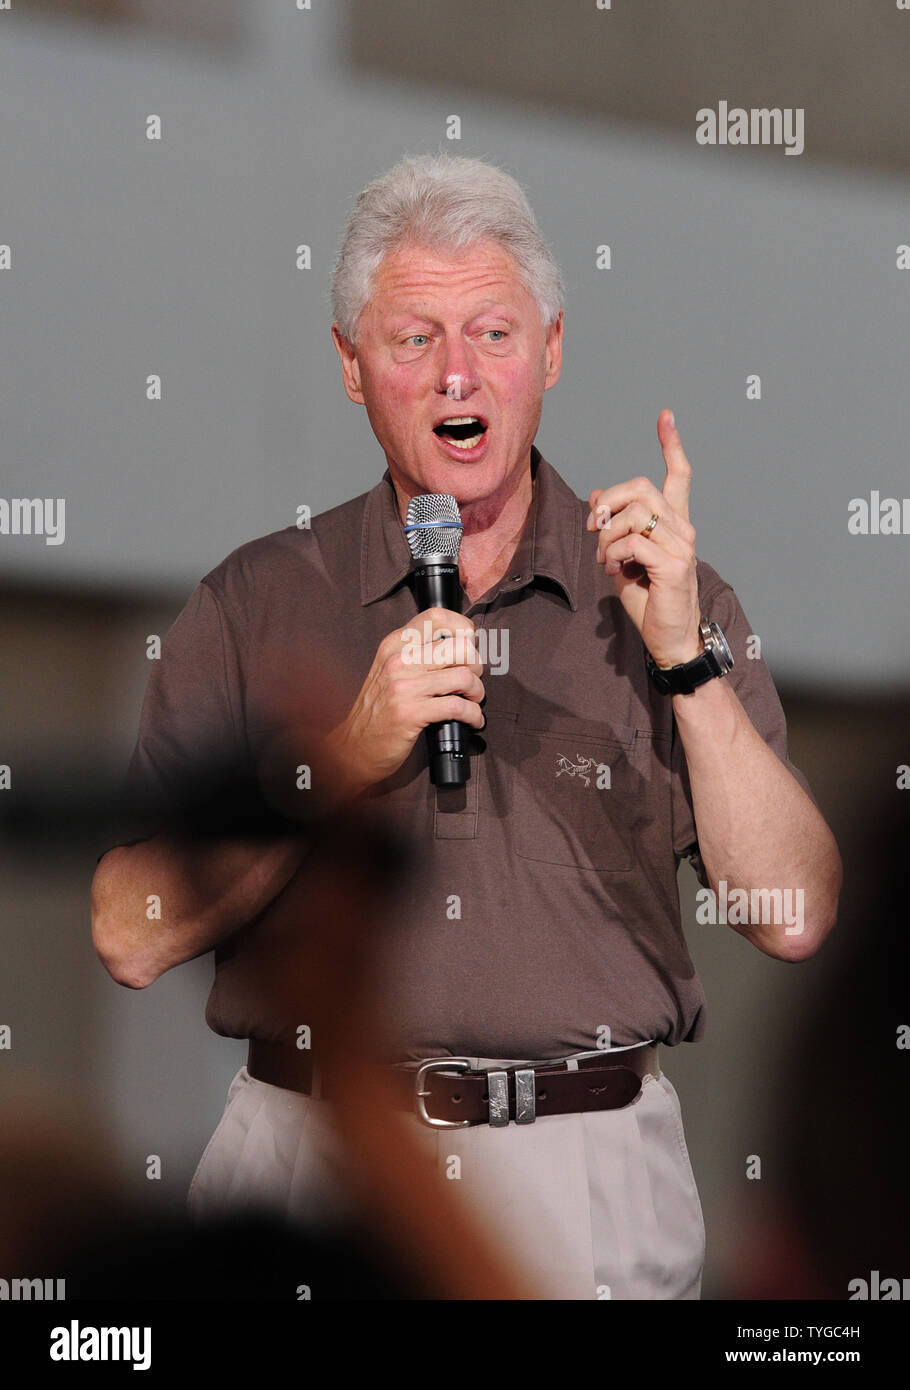 William Jefferson (Bill) Clinton, 42nd President of the United States, makes a point in his speech during an Obama rally at Chaparral High School in Las Vegas, Nevada on October 19, 2008.  (UPI Photo/David Allio) Stock Photo